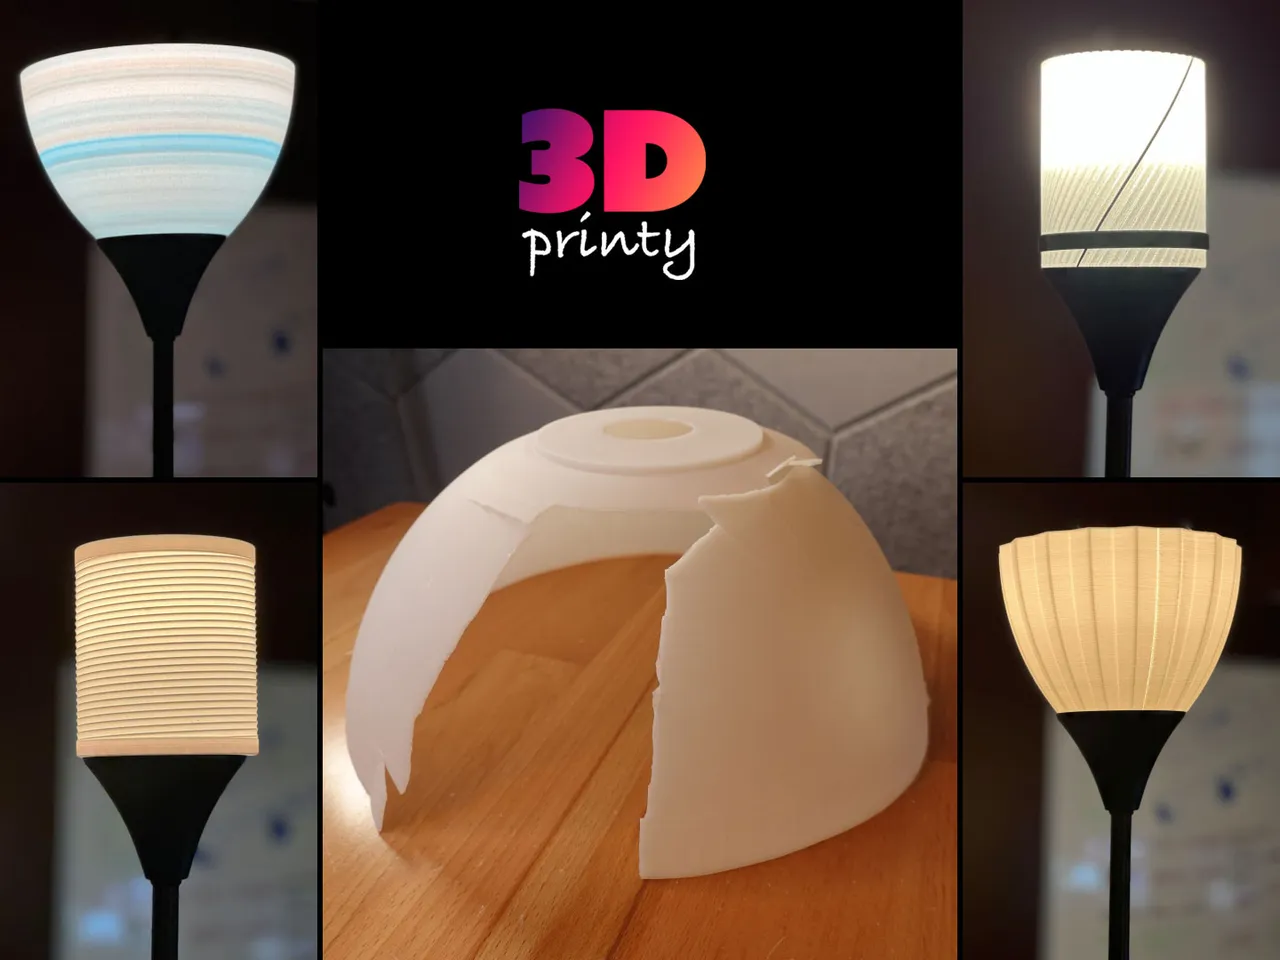 3D Printed Lamp Shades Made From PLA